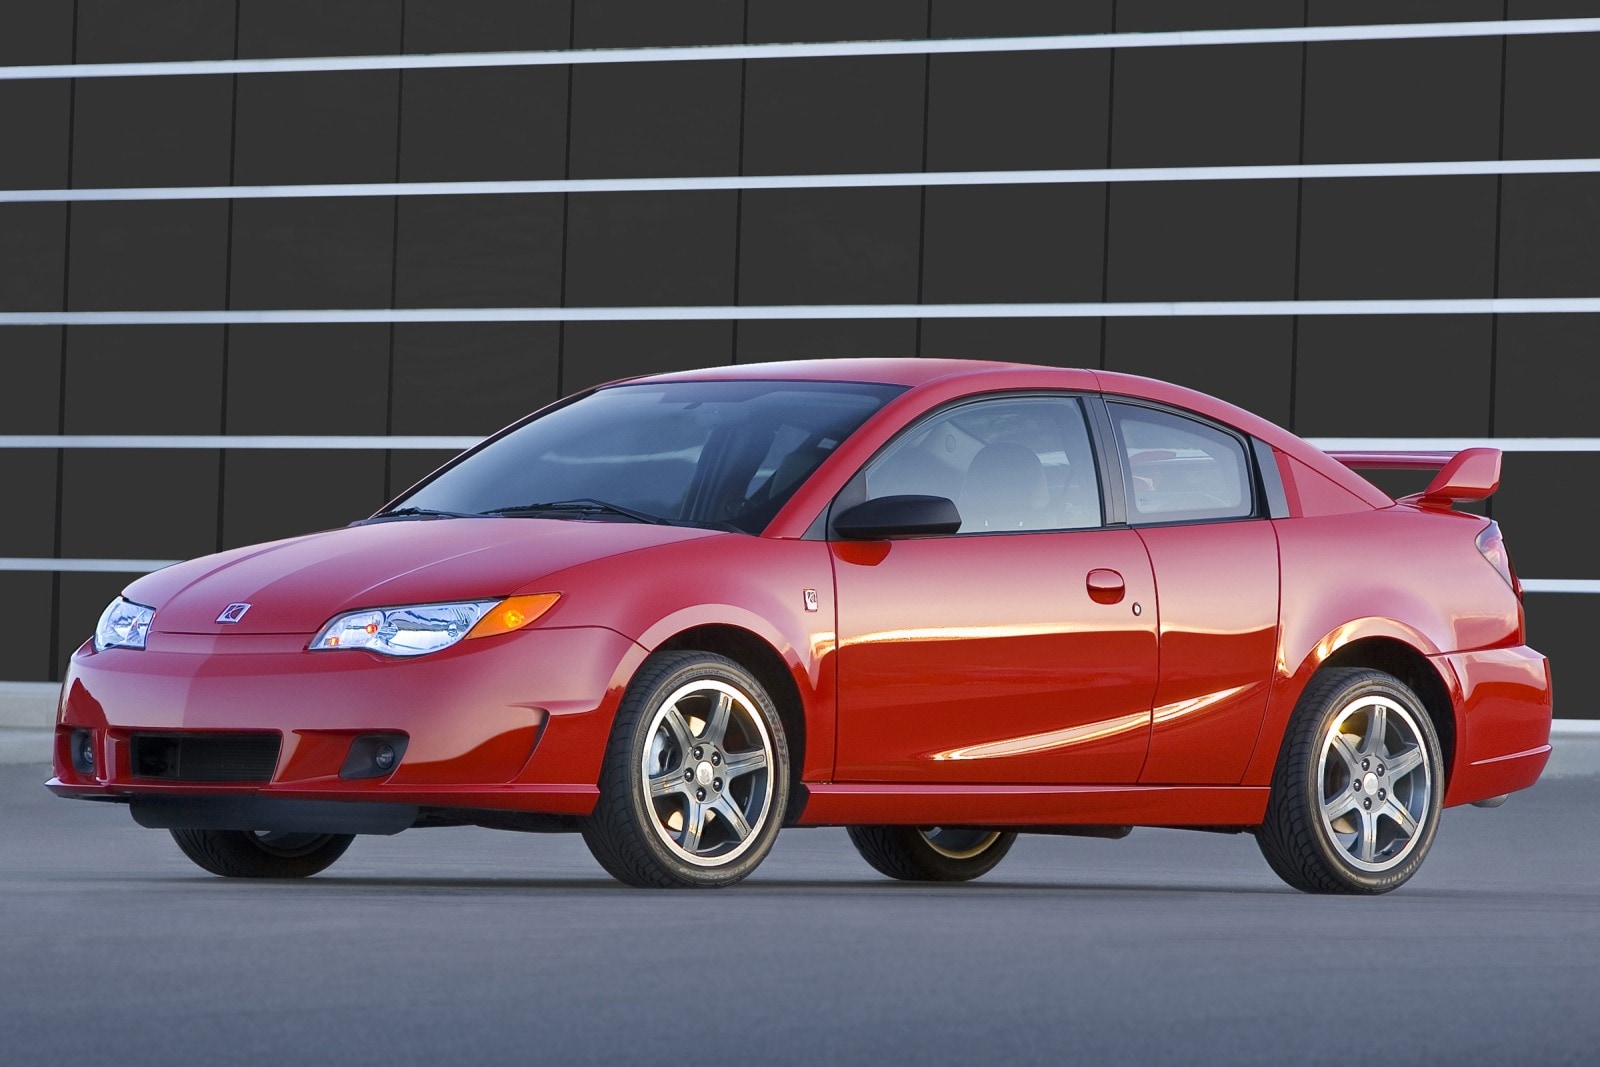 Used 2007 Saturn ION Red Line Review | Edmunds